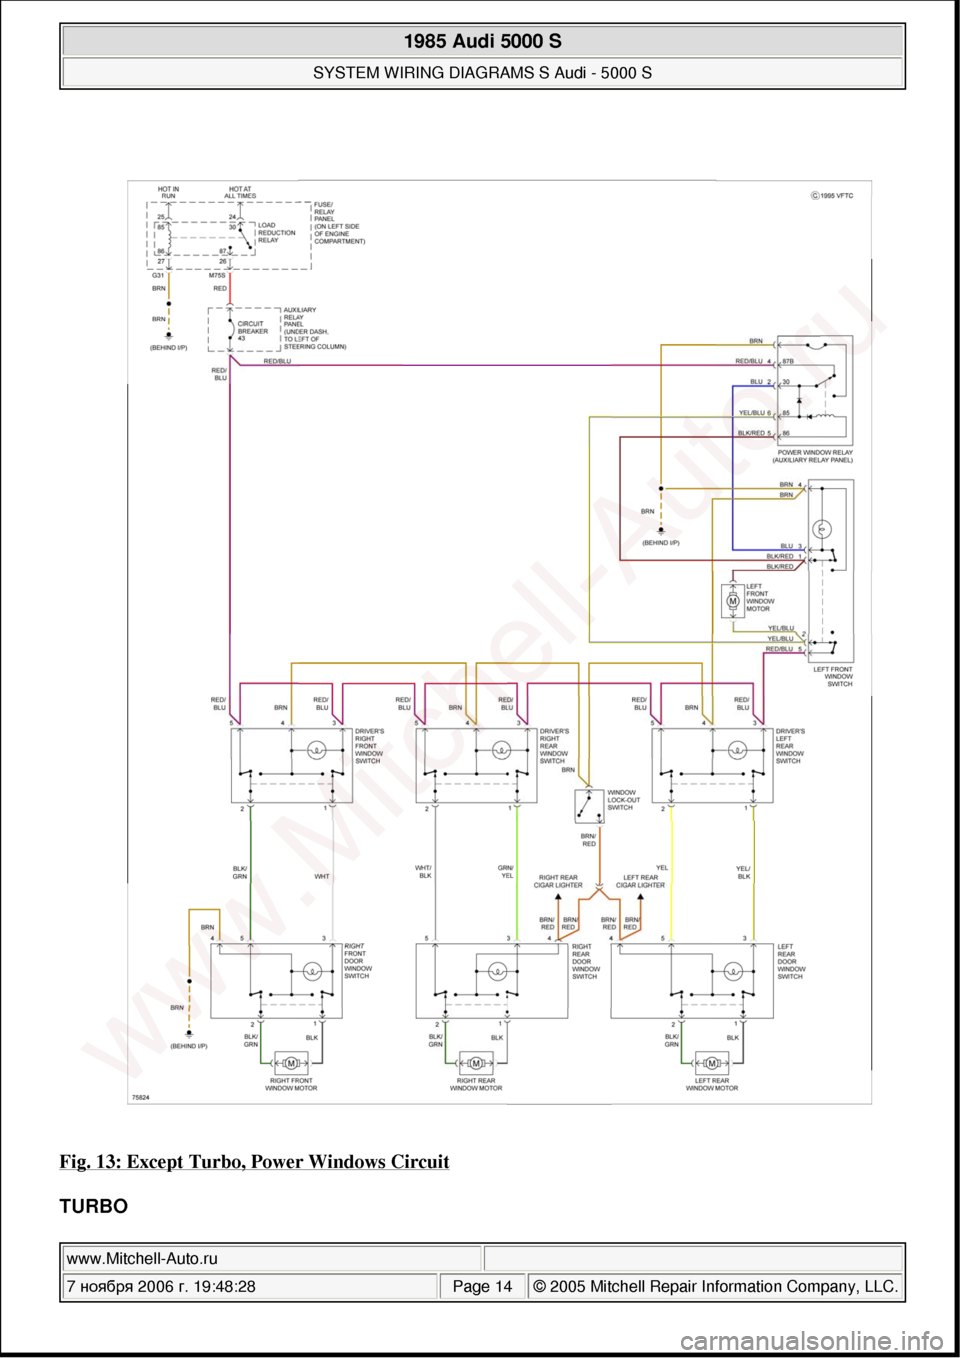 AUDI 5000S 1985 C2 System Wiring Diagram 
Fig. 13: Except Turbo, Power Windows Circuit 
TURBO 
 
1985 Audi 5000 S 
SYSTEM WIRING DIAGRAMS S Audi - 5000 S  
www.Mitchell-Auto.ru  
7  ноября  2006 г. 19:48:28Page 14 © 2005 Mitchell Rep